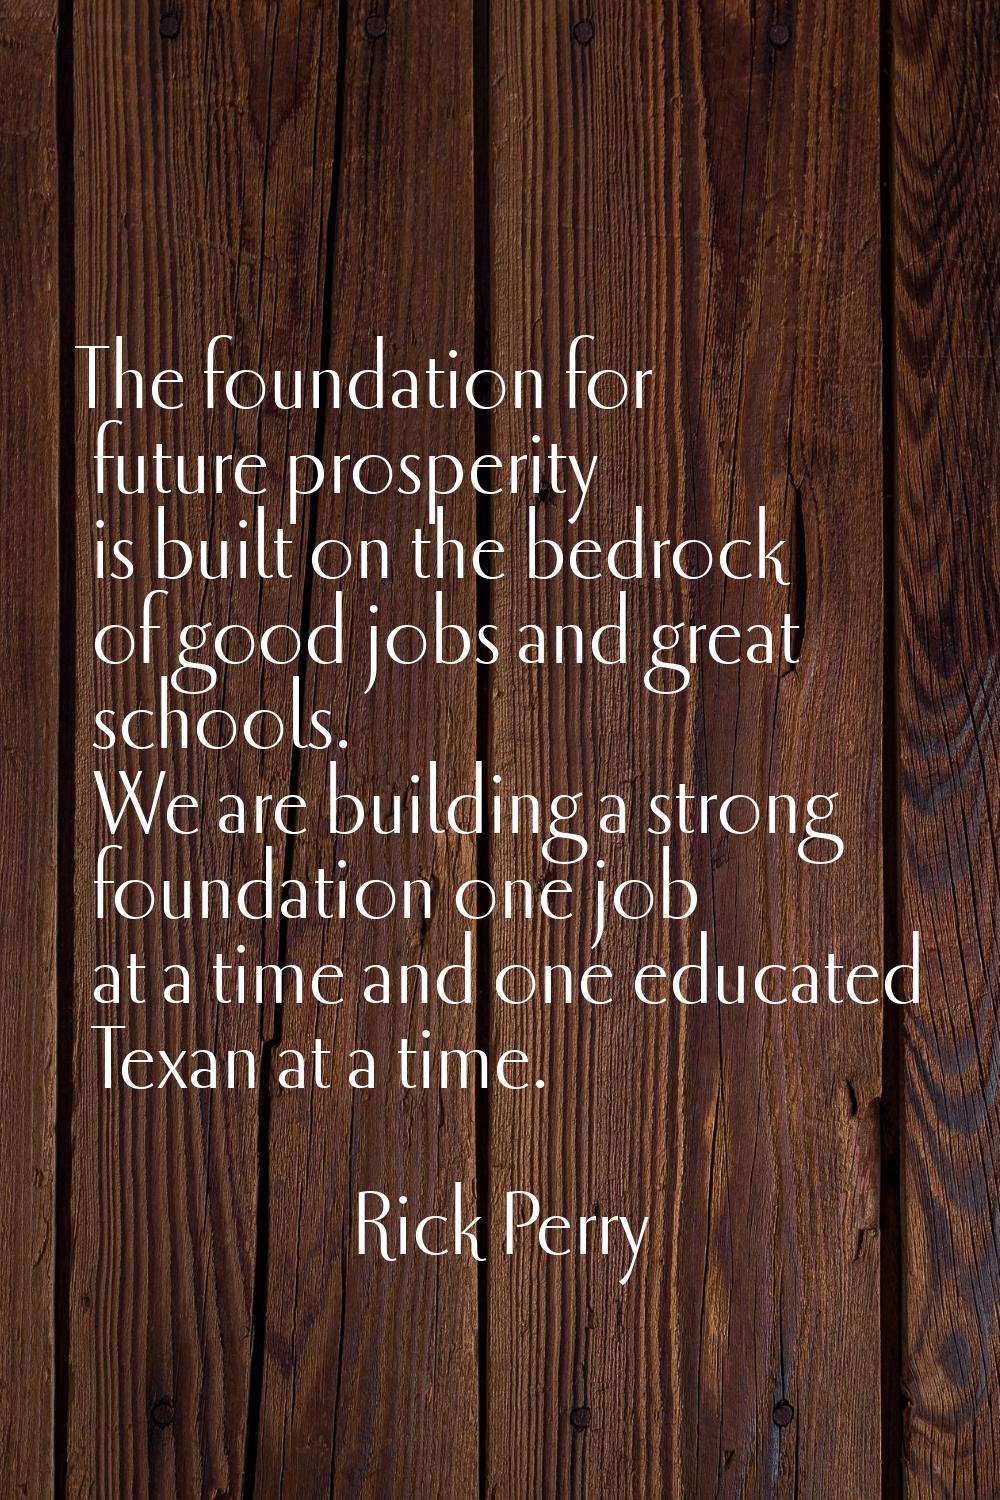 The foundation for future prosperity is built on the bedrock of good jobs and great schools. We are